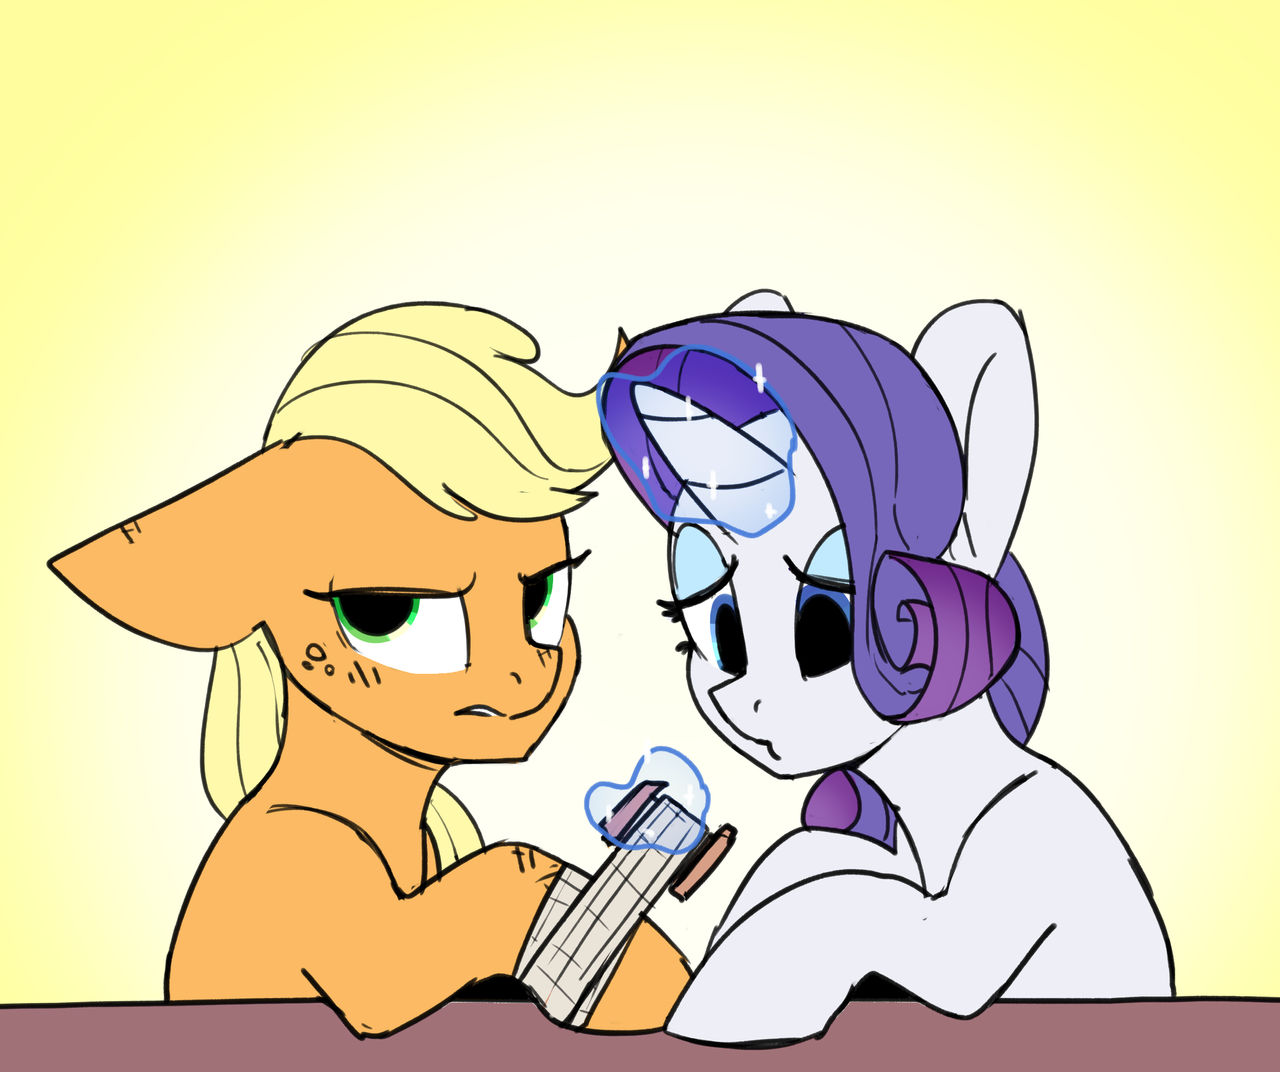 NATG 2020 - Day 26: A Gifting Friendship